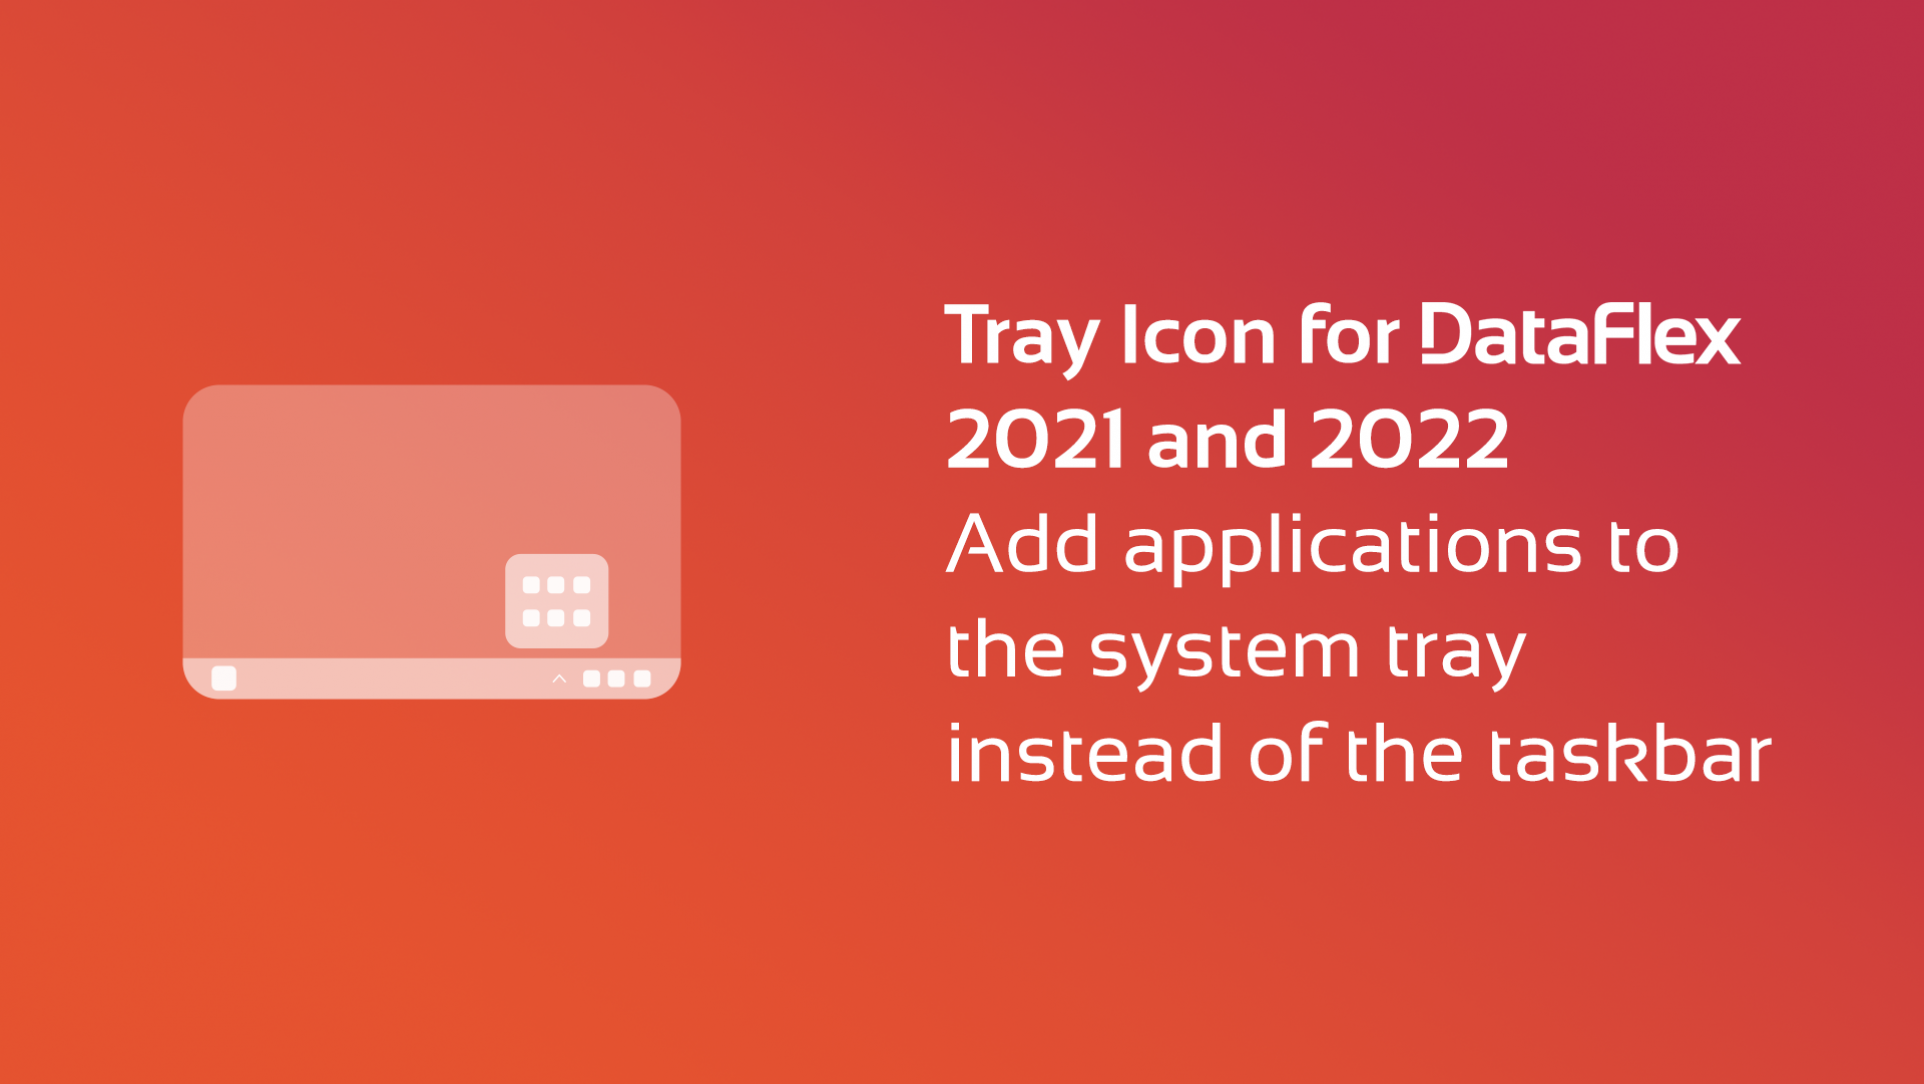 Tray Icon for DataFlex 2021 and 2022